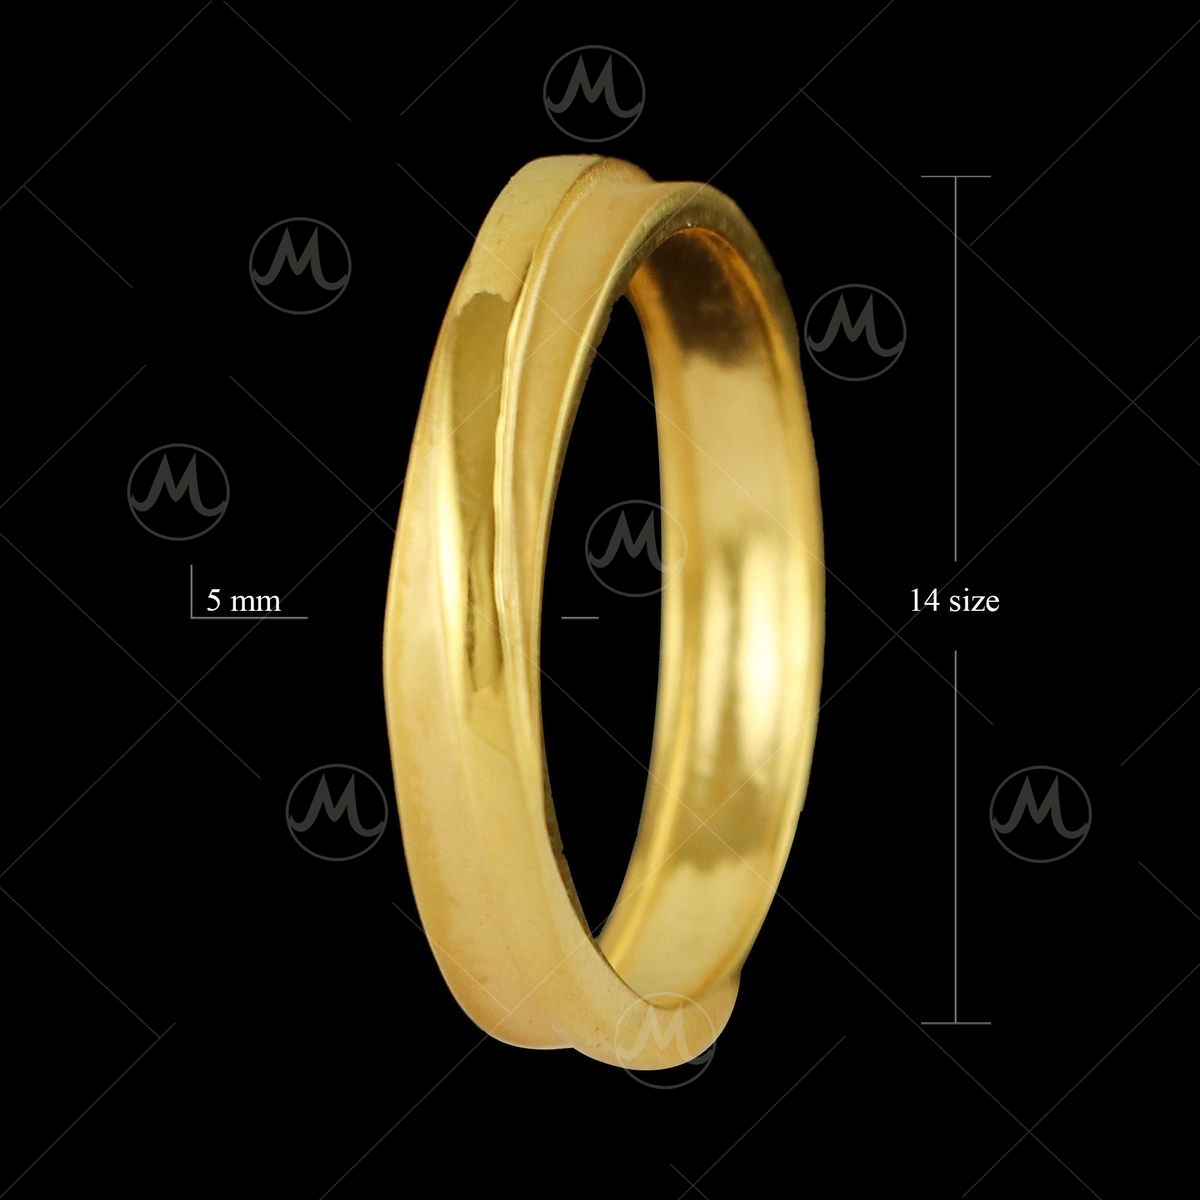 1 Gram Gold Forming Delicate Design Diamond Border Gold Plated Ring For Men  - Style A021 at Rs 1100.00 | Rajkot| ID: 25167890830